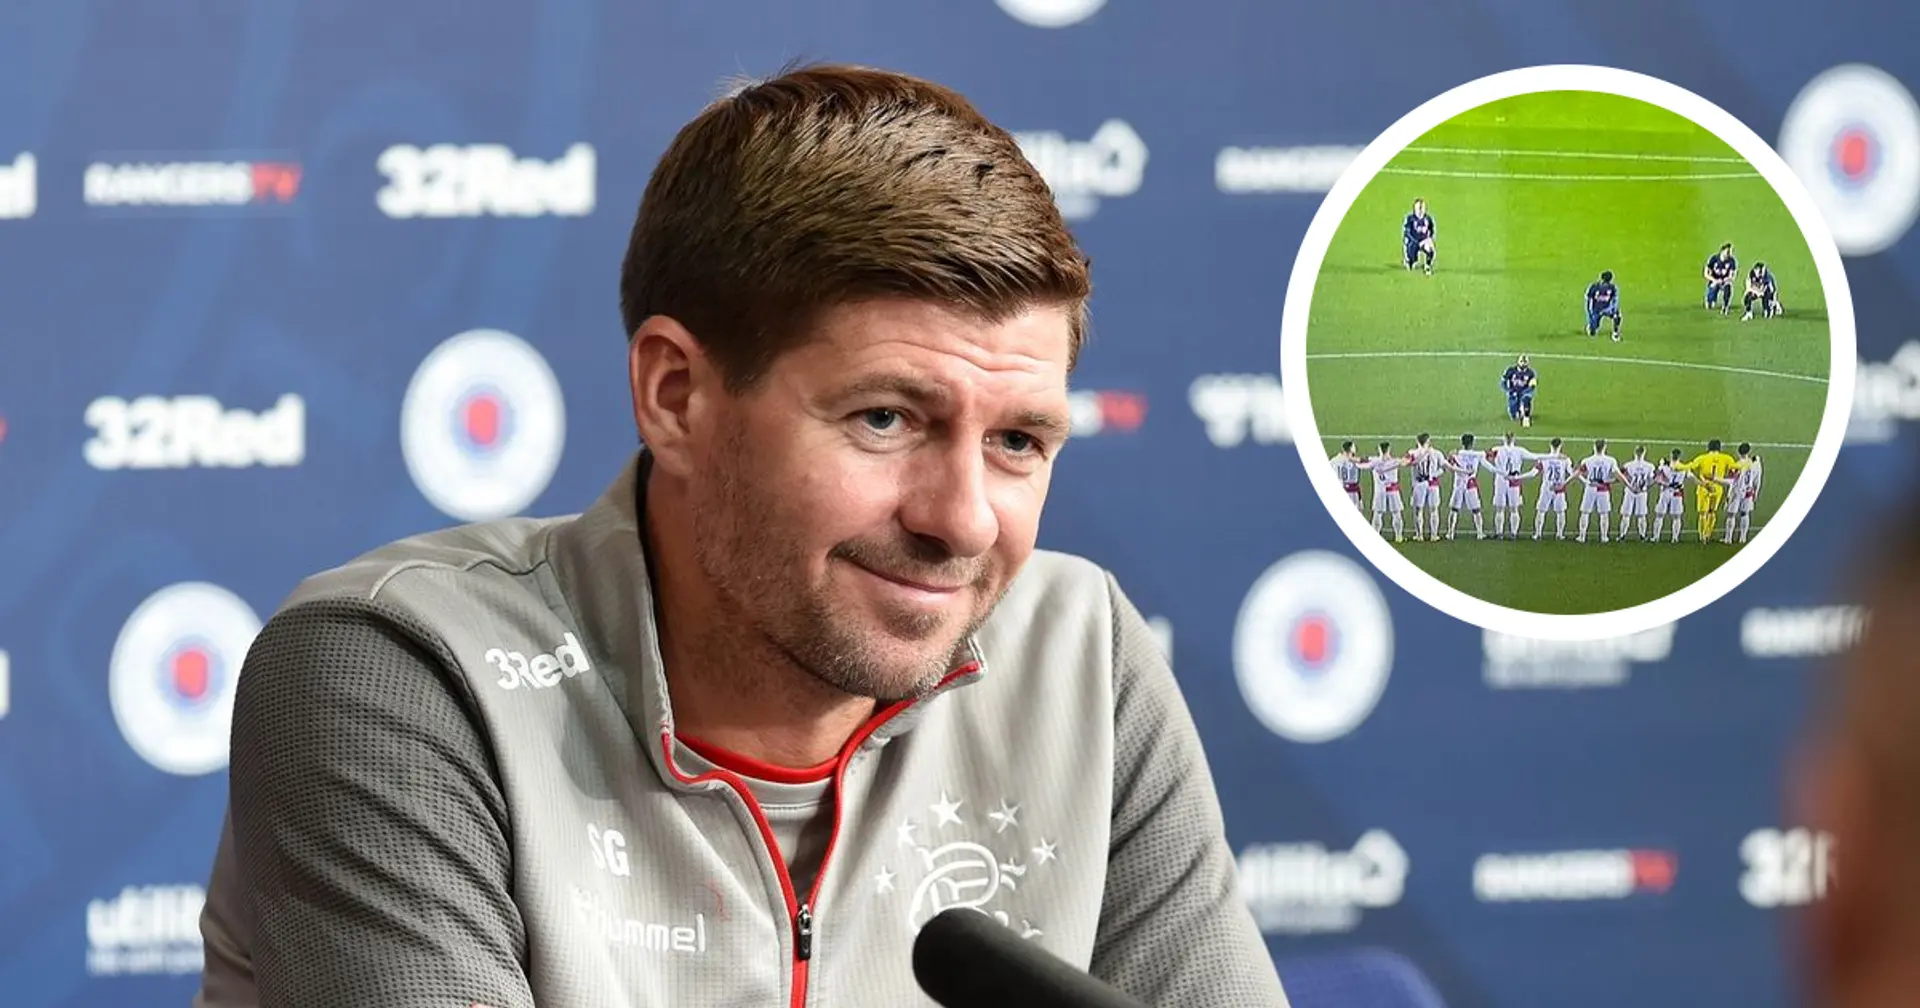 'I loved everything about the game': Steven Gerrard blown away by Arsenal's display vs Slavia Prague